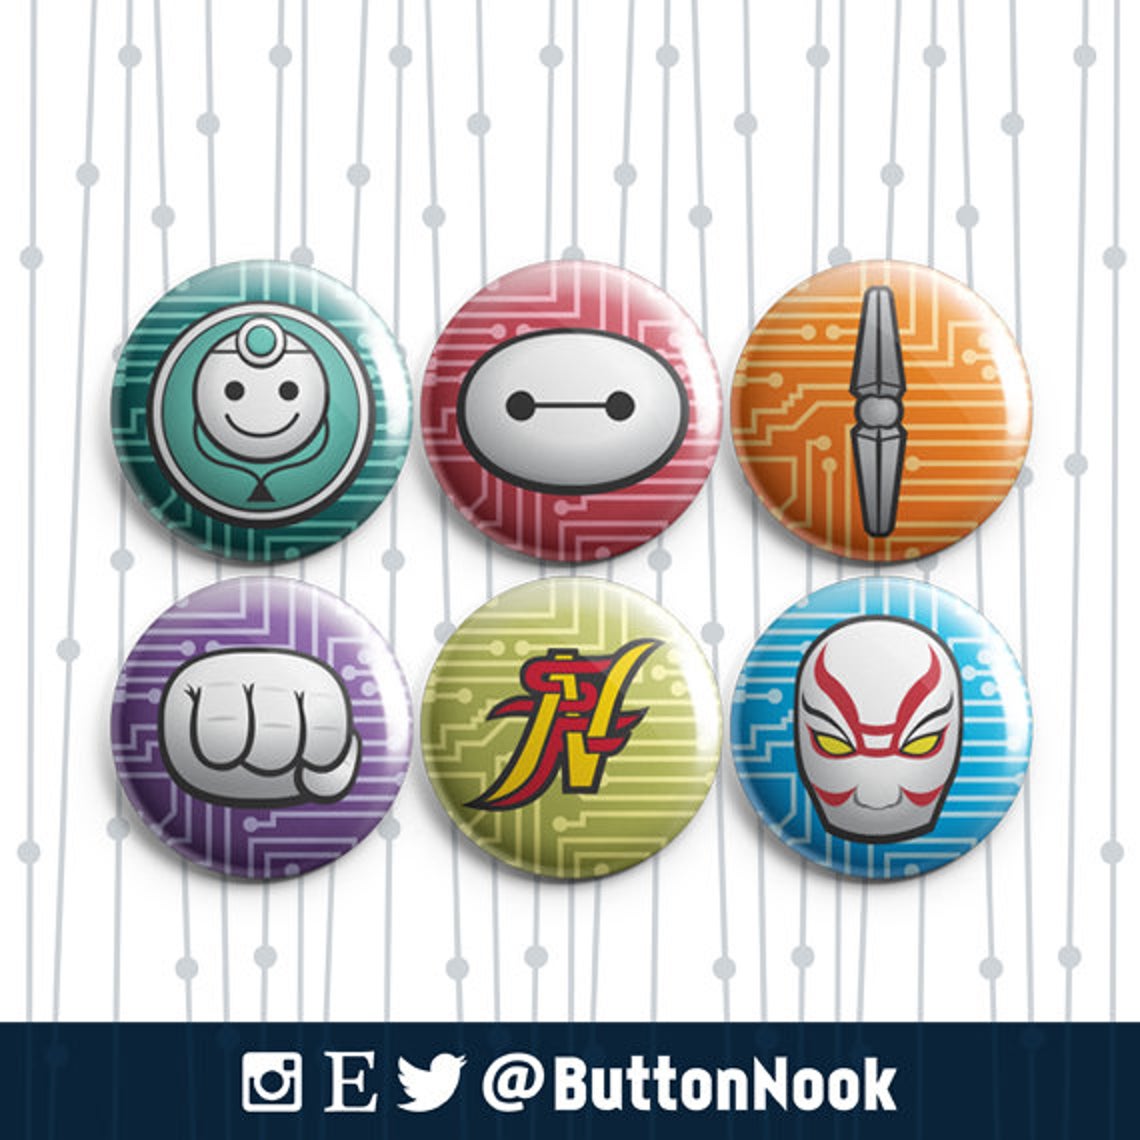 Big Hero 6 gift ideas collecting buttons 